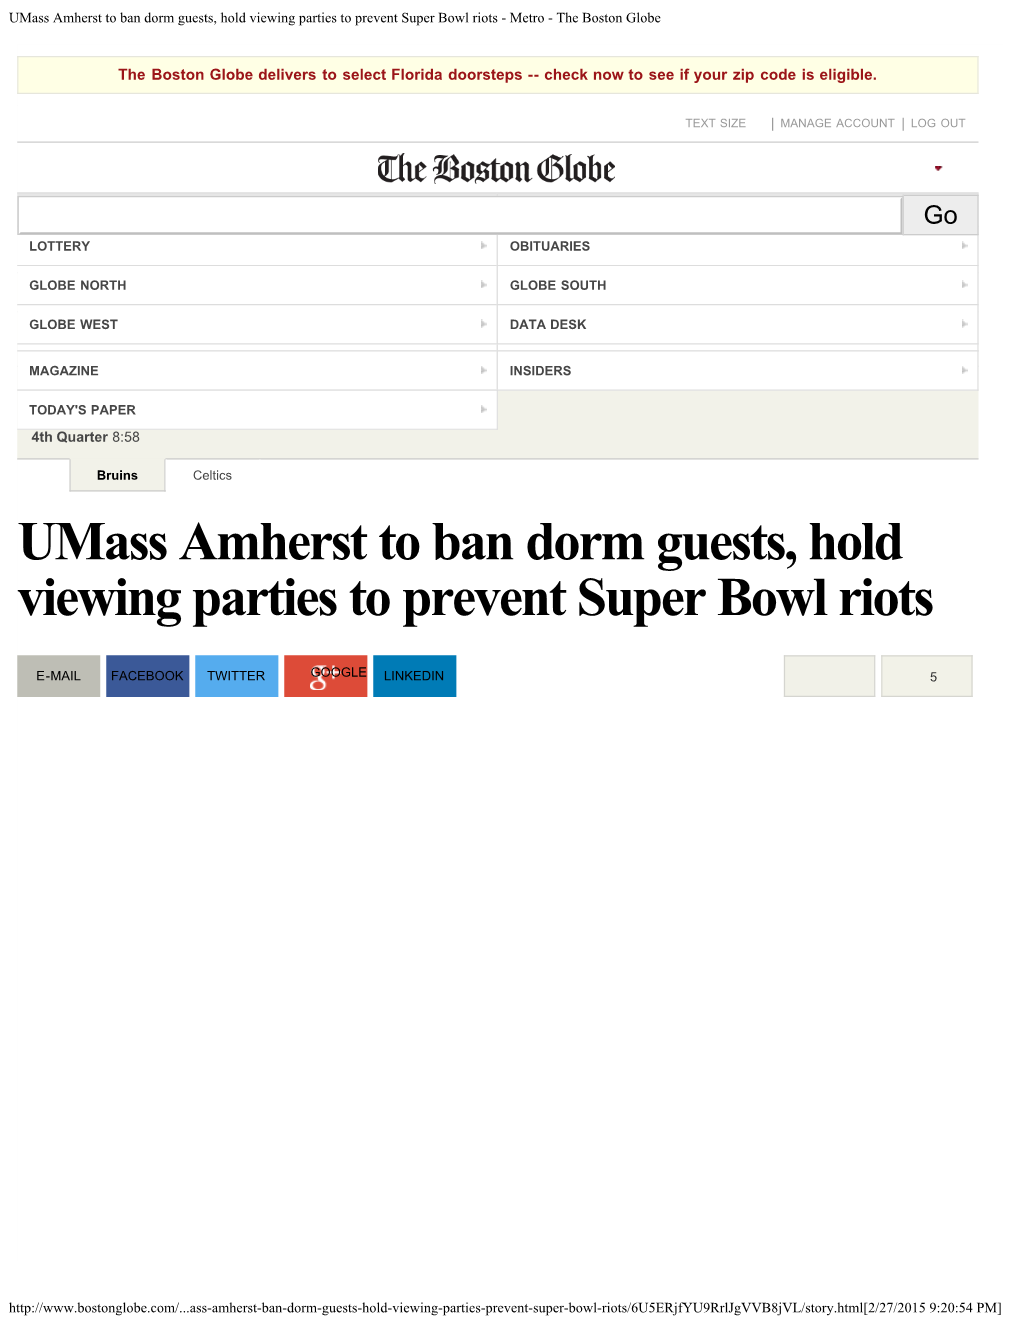 Umass Amherst to Ban Dorm Guests, Hold Viewing Parties to Prevent Super Bowl Riots - Metro - the Boston Globe